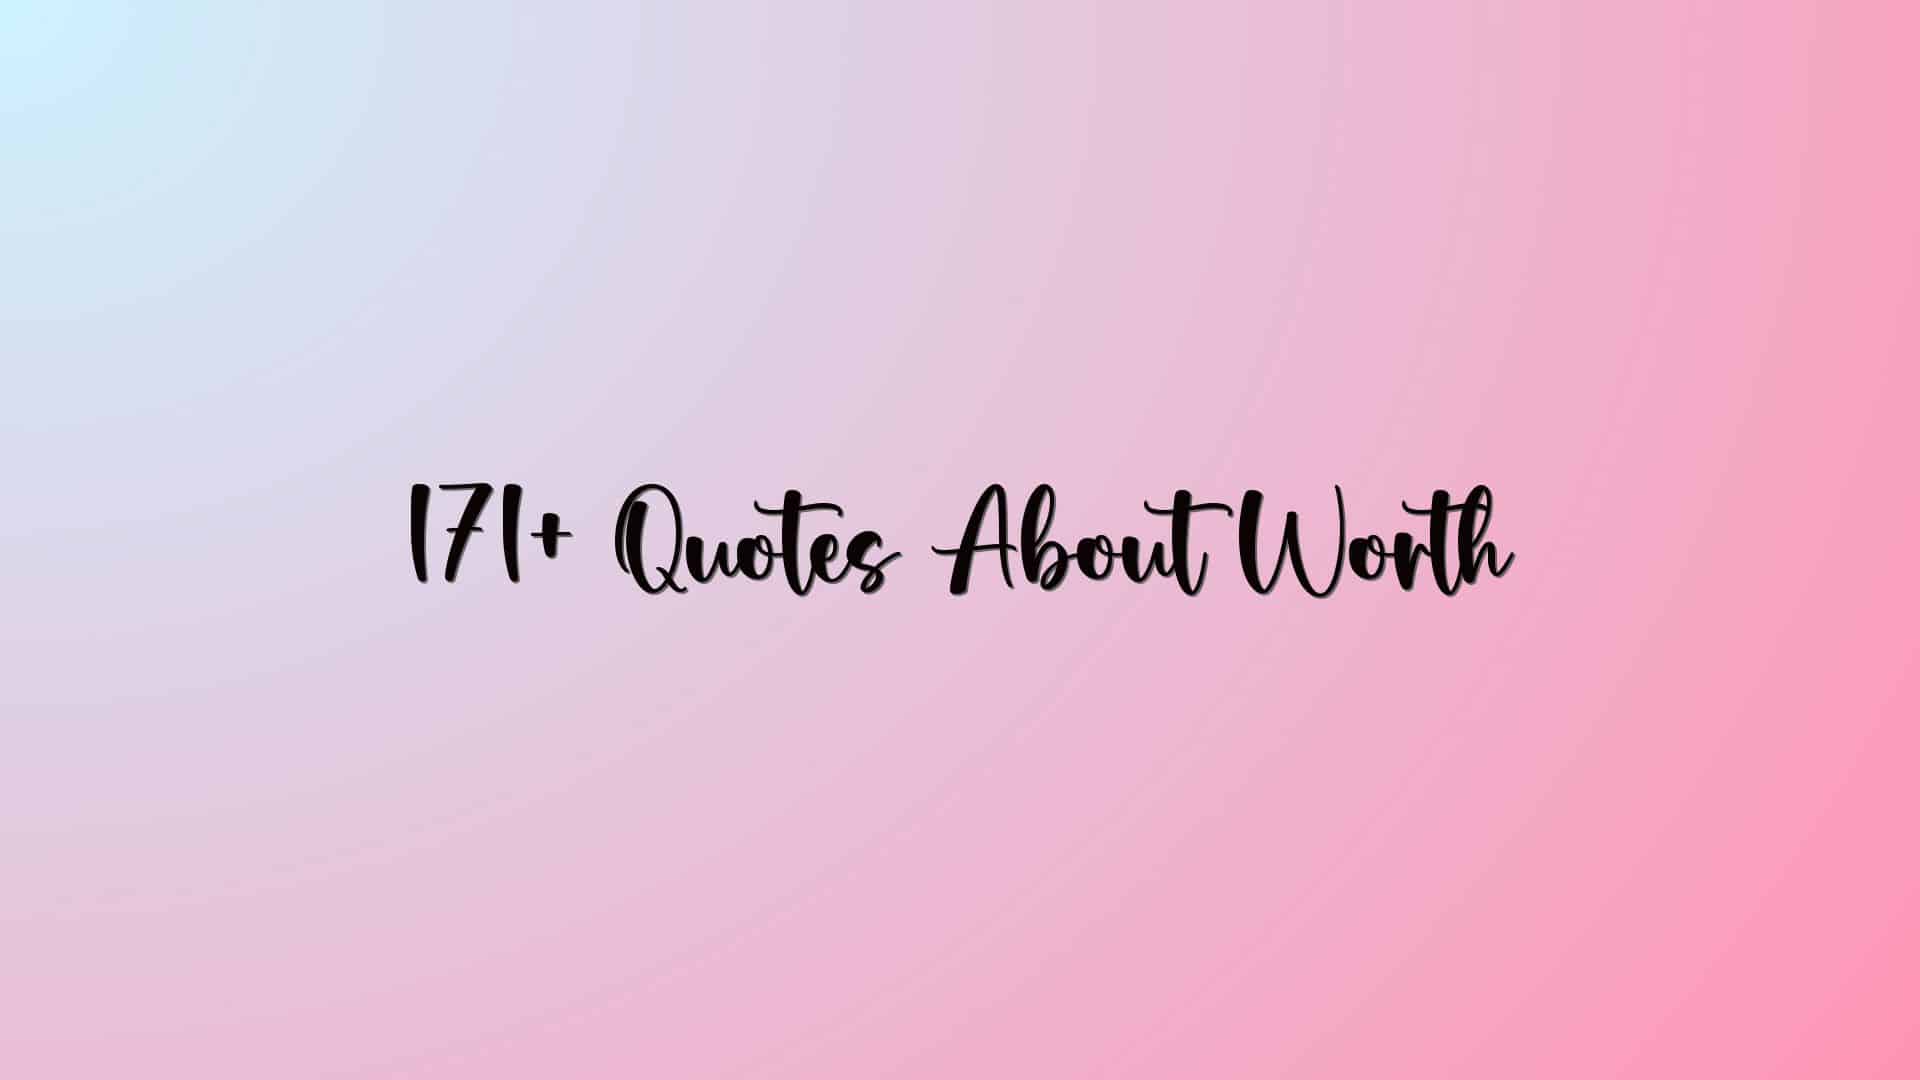 171+ Quotes About Worth